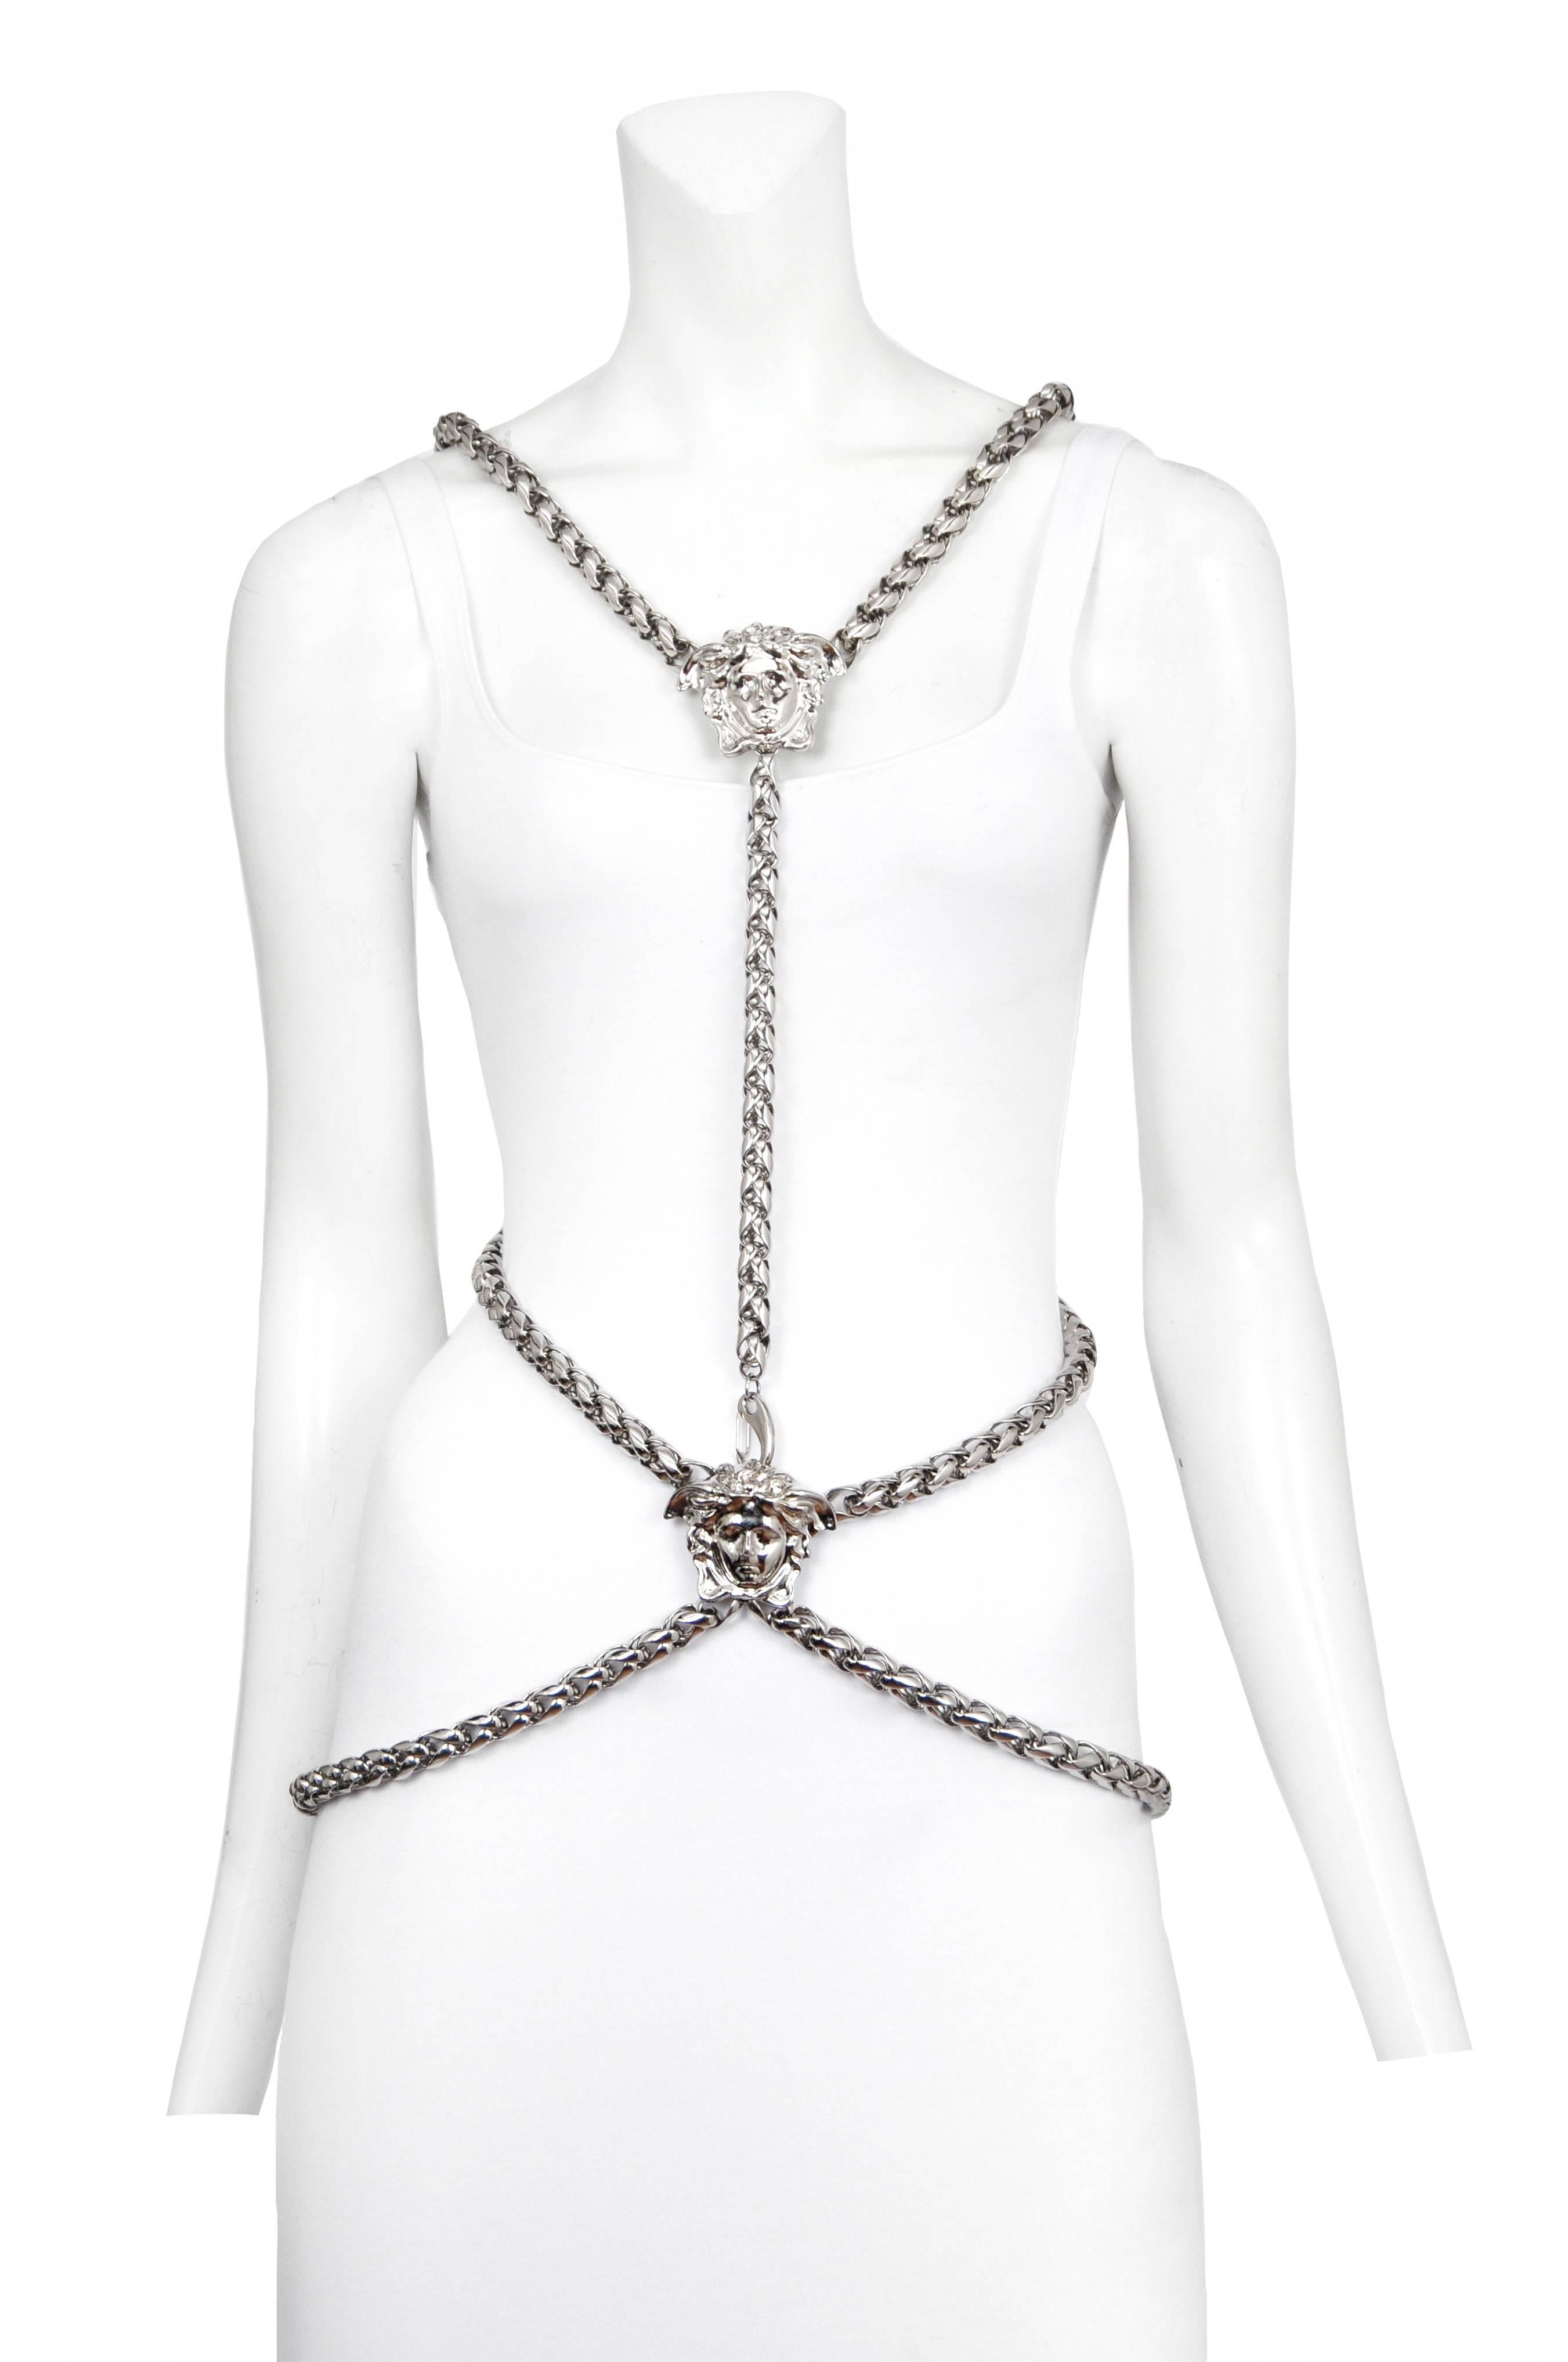 Vintage Versace silver tone chain body harness featuring the designer's signature emblem in the center, front and back.